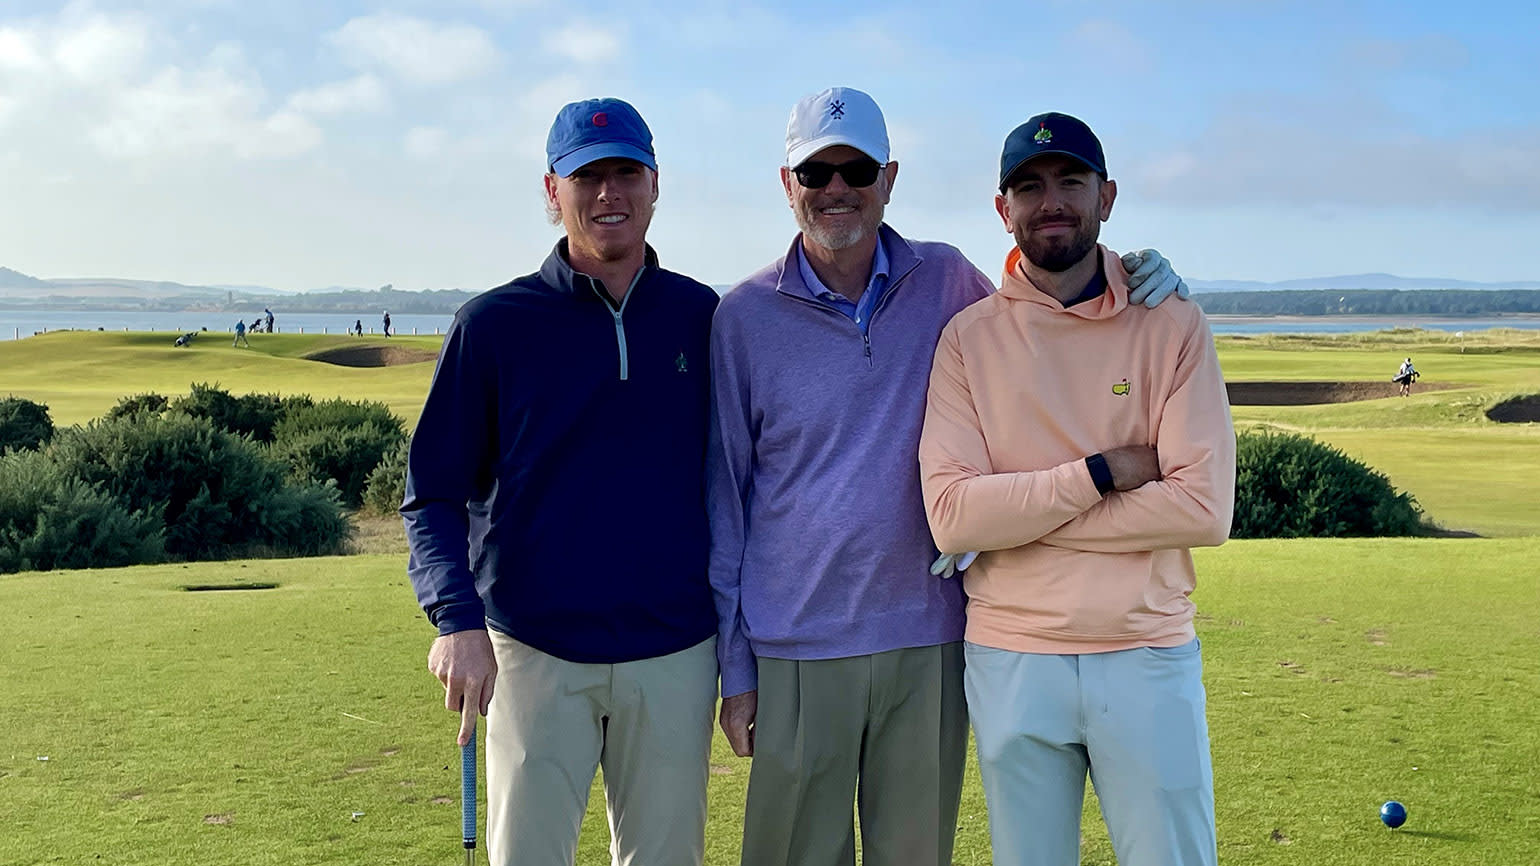 While P.J. Boatwright III (center) didn't follow his legendary father into golf administration, he passed down the passion for the game to sons Jack (left) and Graham. This photo was taken on the Old Course at St. Andrews.(Boatwright Family)